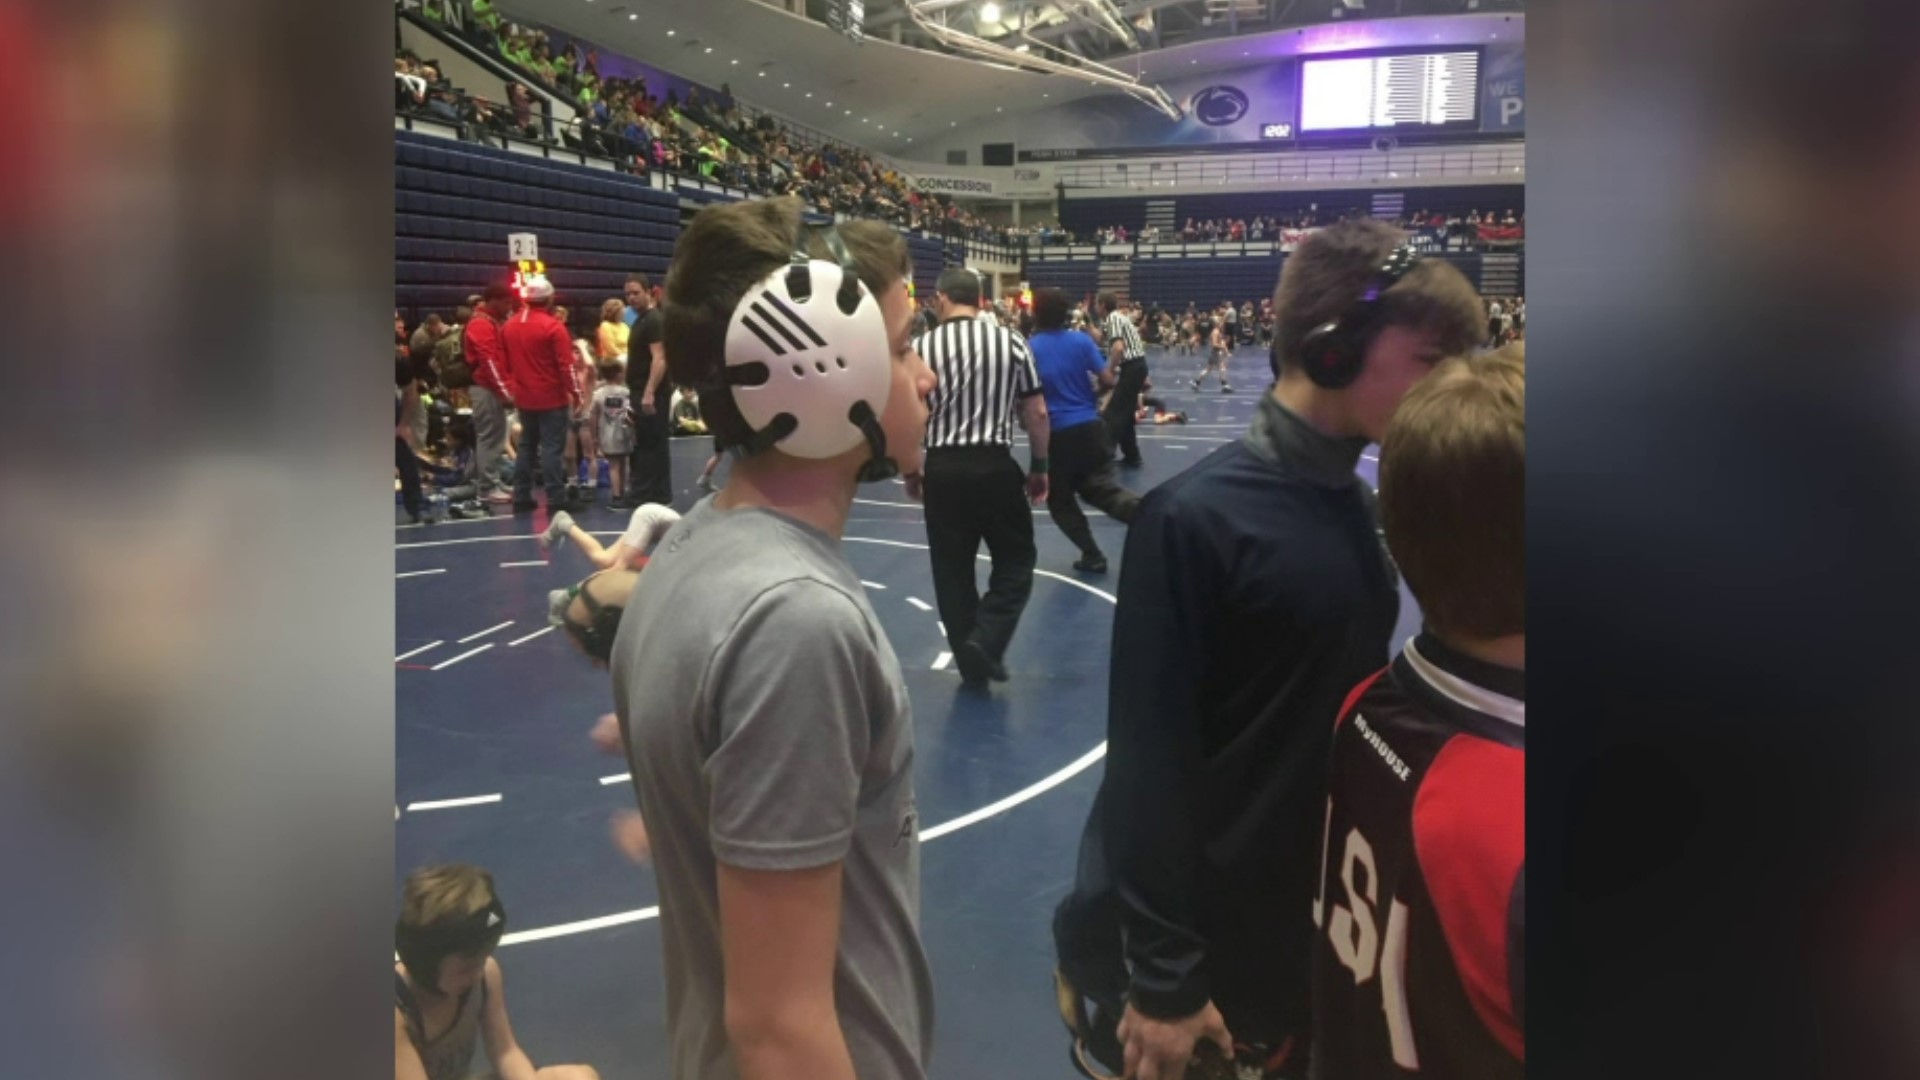 With a narcolepsy diagnosis, a Mifflinburg teen has had trouble completing his wrestling seasons.